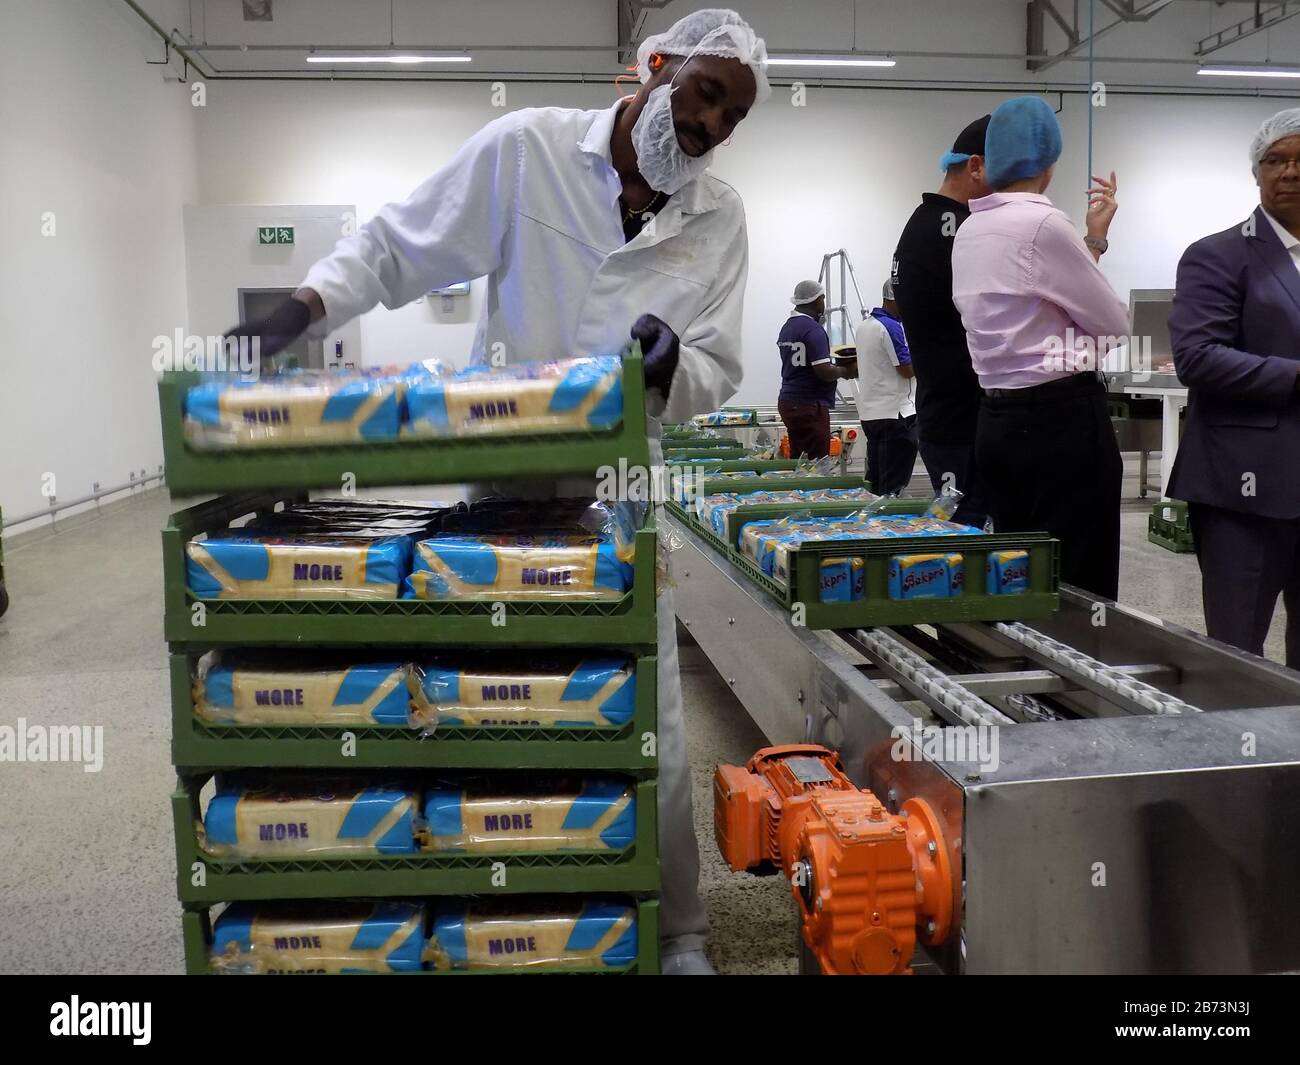 (200313) -- WINDHOEK, March 13, 2020 (Xinhua) -- A worker carries packaged bread at a bread manufacturing factory in Windhoek, Namibia, March 12, 2020. Namibia's Minister of Industrialization, Trade and SME Development Tjekero Tweya on Thursday inaugurated the country's first-ever state-of-the-art bread manufacturing factory valued at around 135 million Namibia dollars (about 8.4 million U.S. dollars). The factory system runs like a conveyor belt through the entire process of mixing, fermenting, baking and packaging. (Photo by Musa C Kaseke/Xinhua) Stock Photo